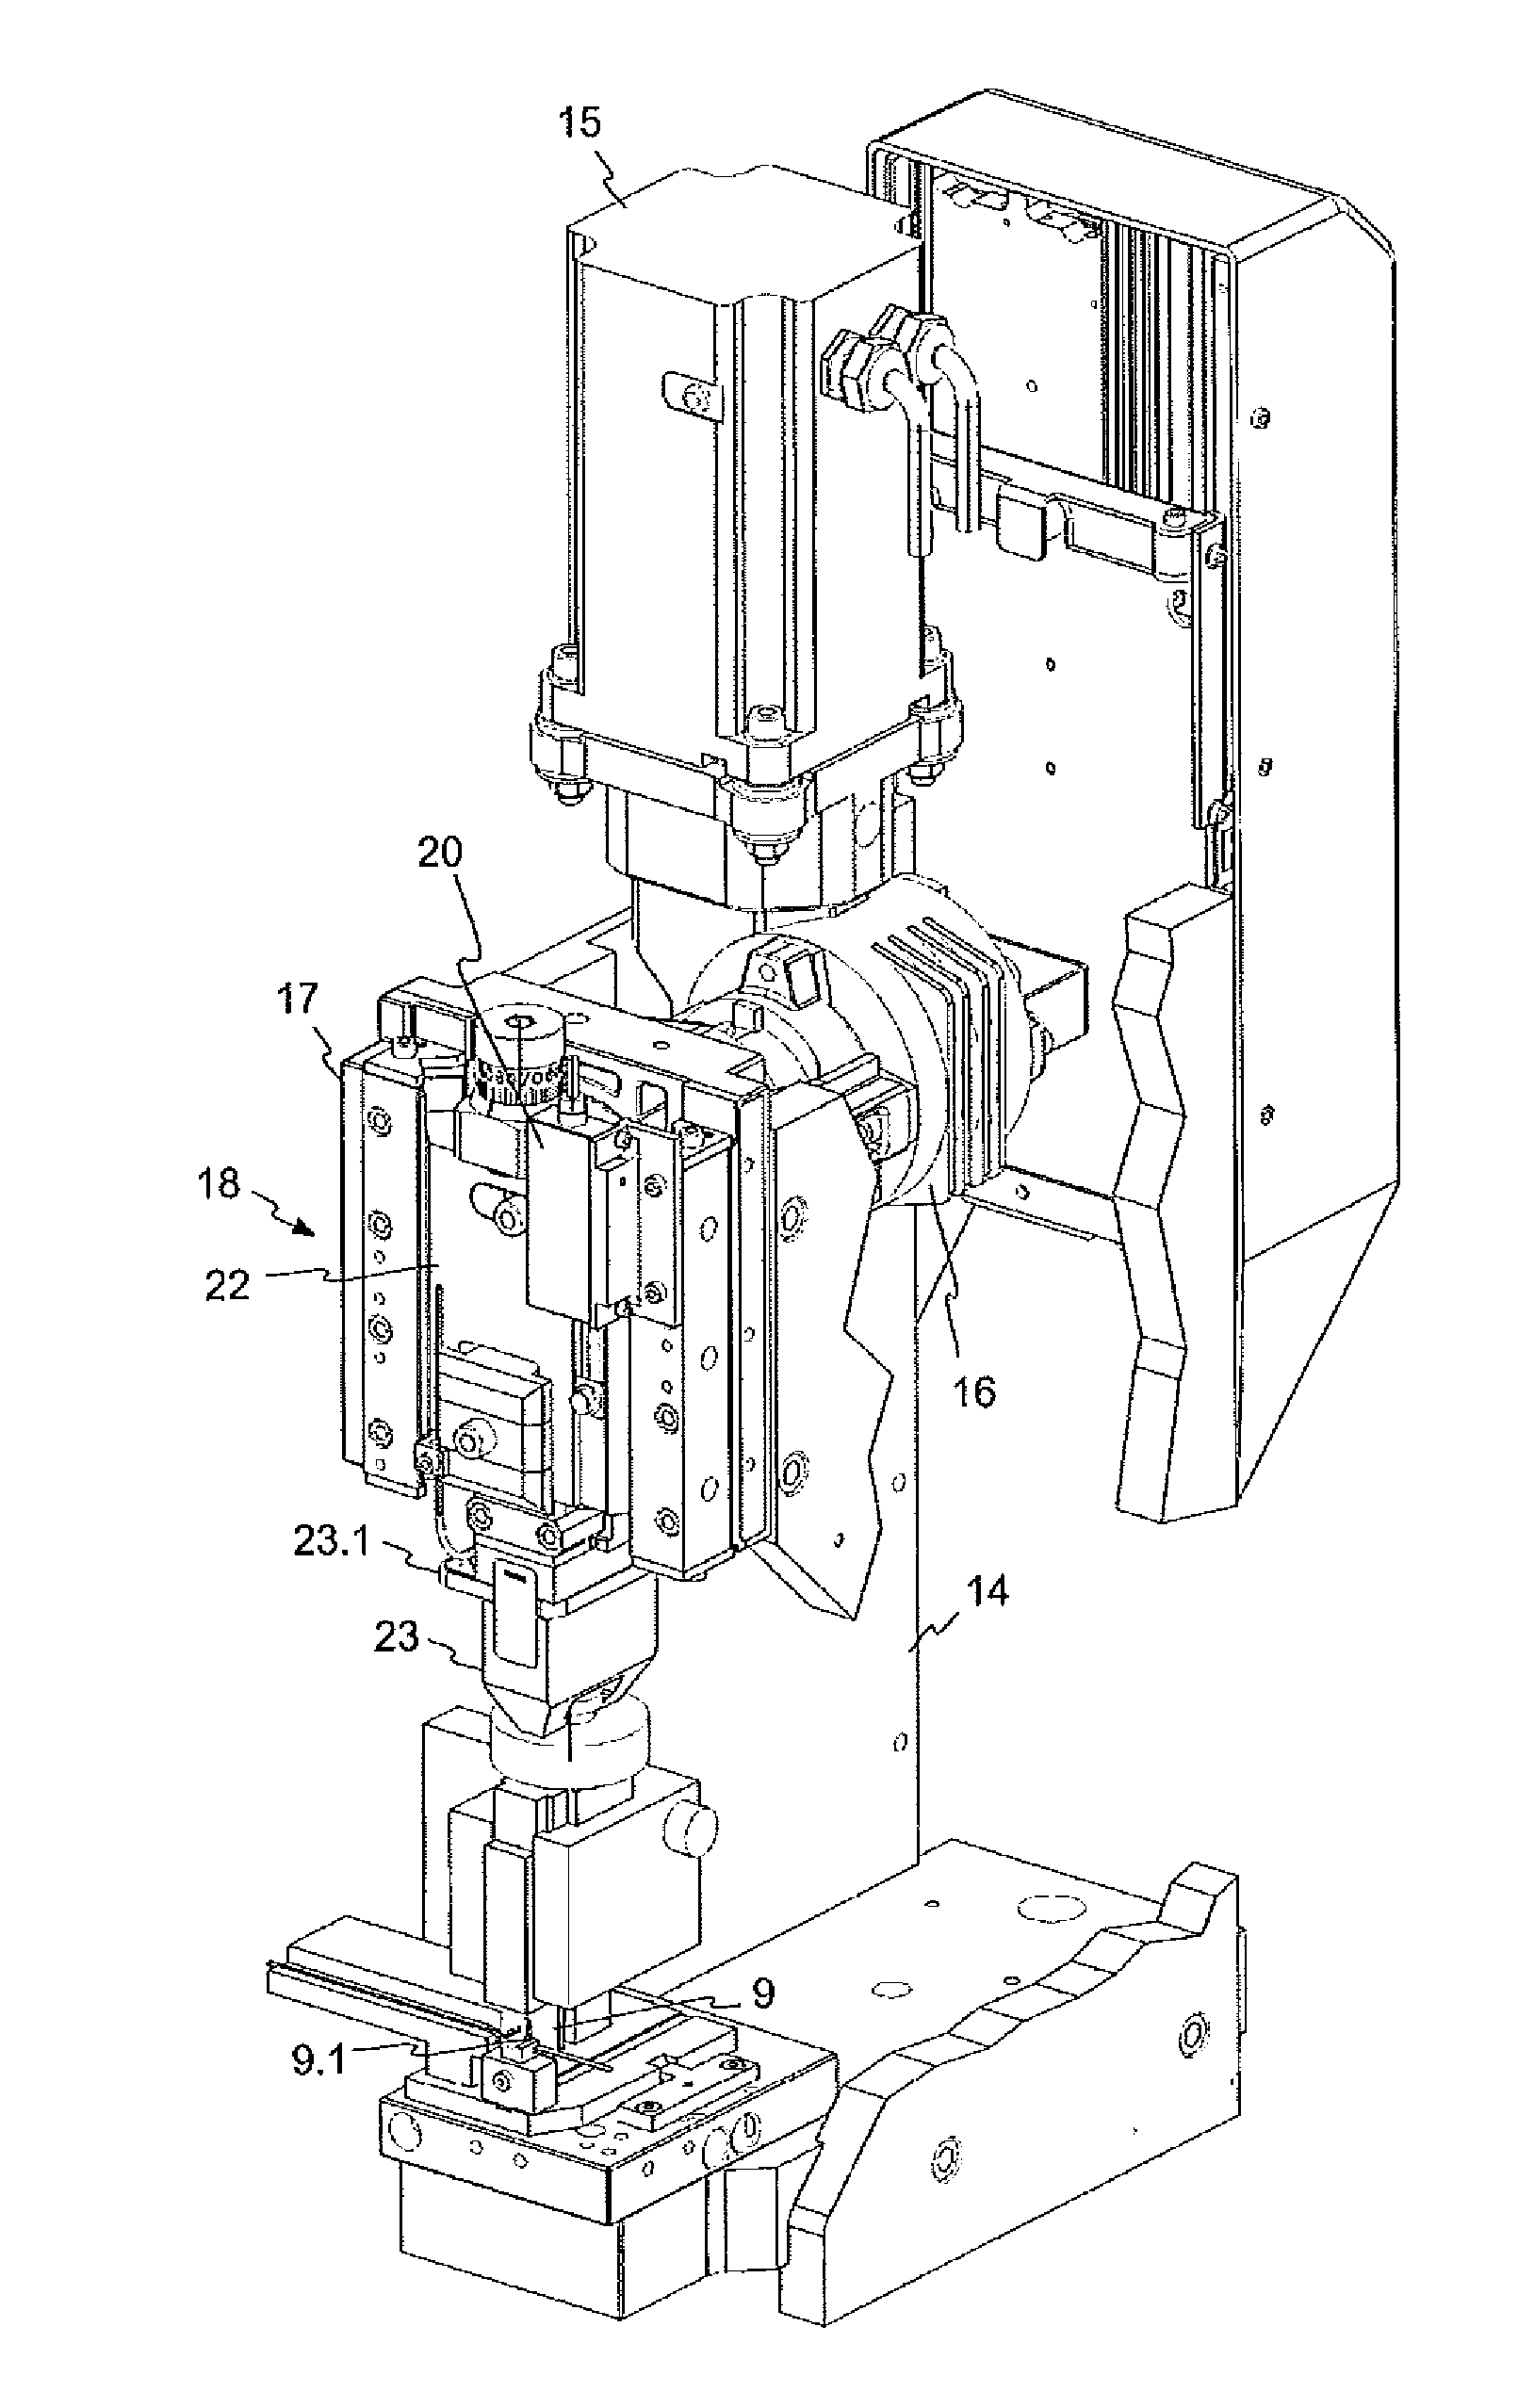 Method for determining the quality of a crimped connection between a conductor and a contact